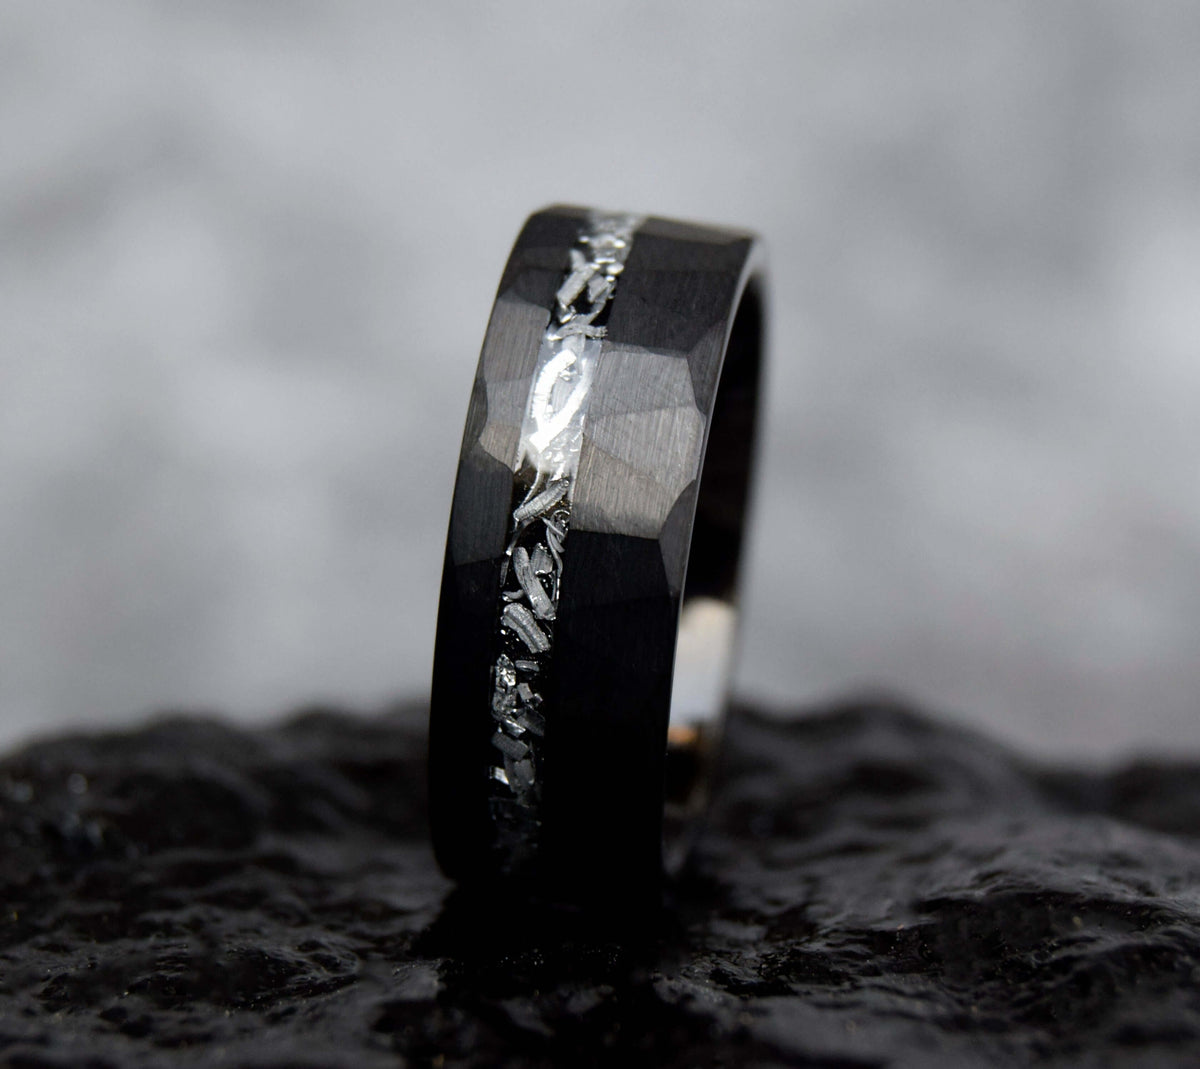 Black Hammered Finished Meteorite Shaving Inlay Tungsten Ring-Mens Tungsten Carbide Ring-The Great Arctic